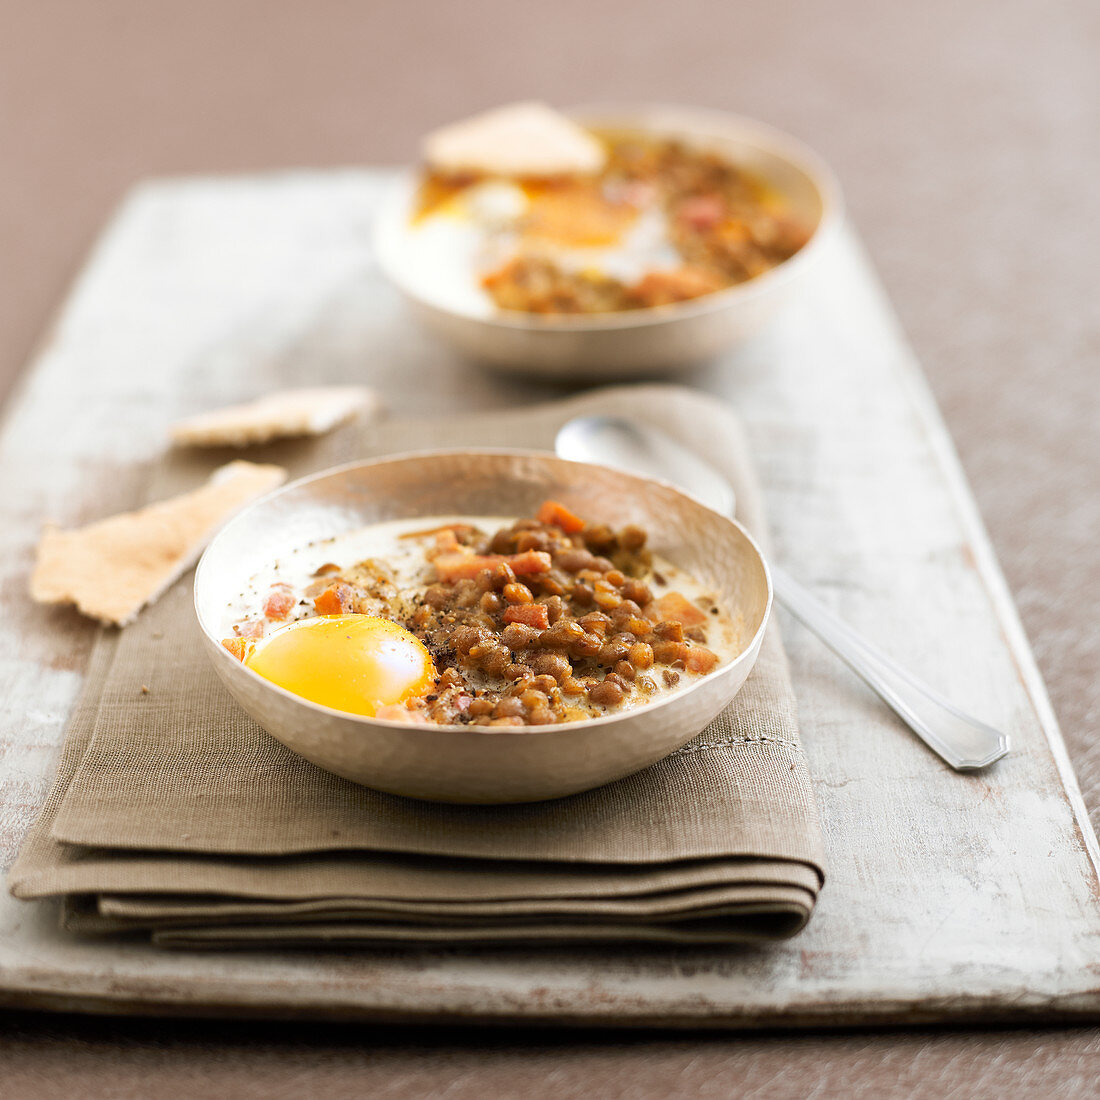 Oeuf cocotte with lentil colombo